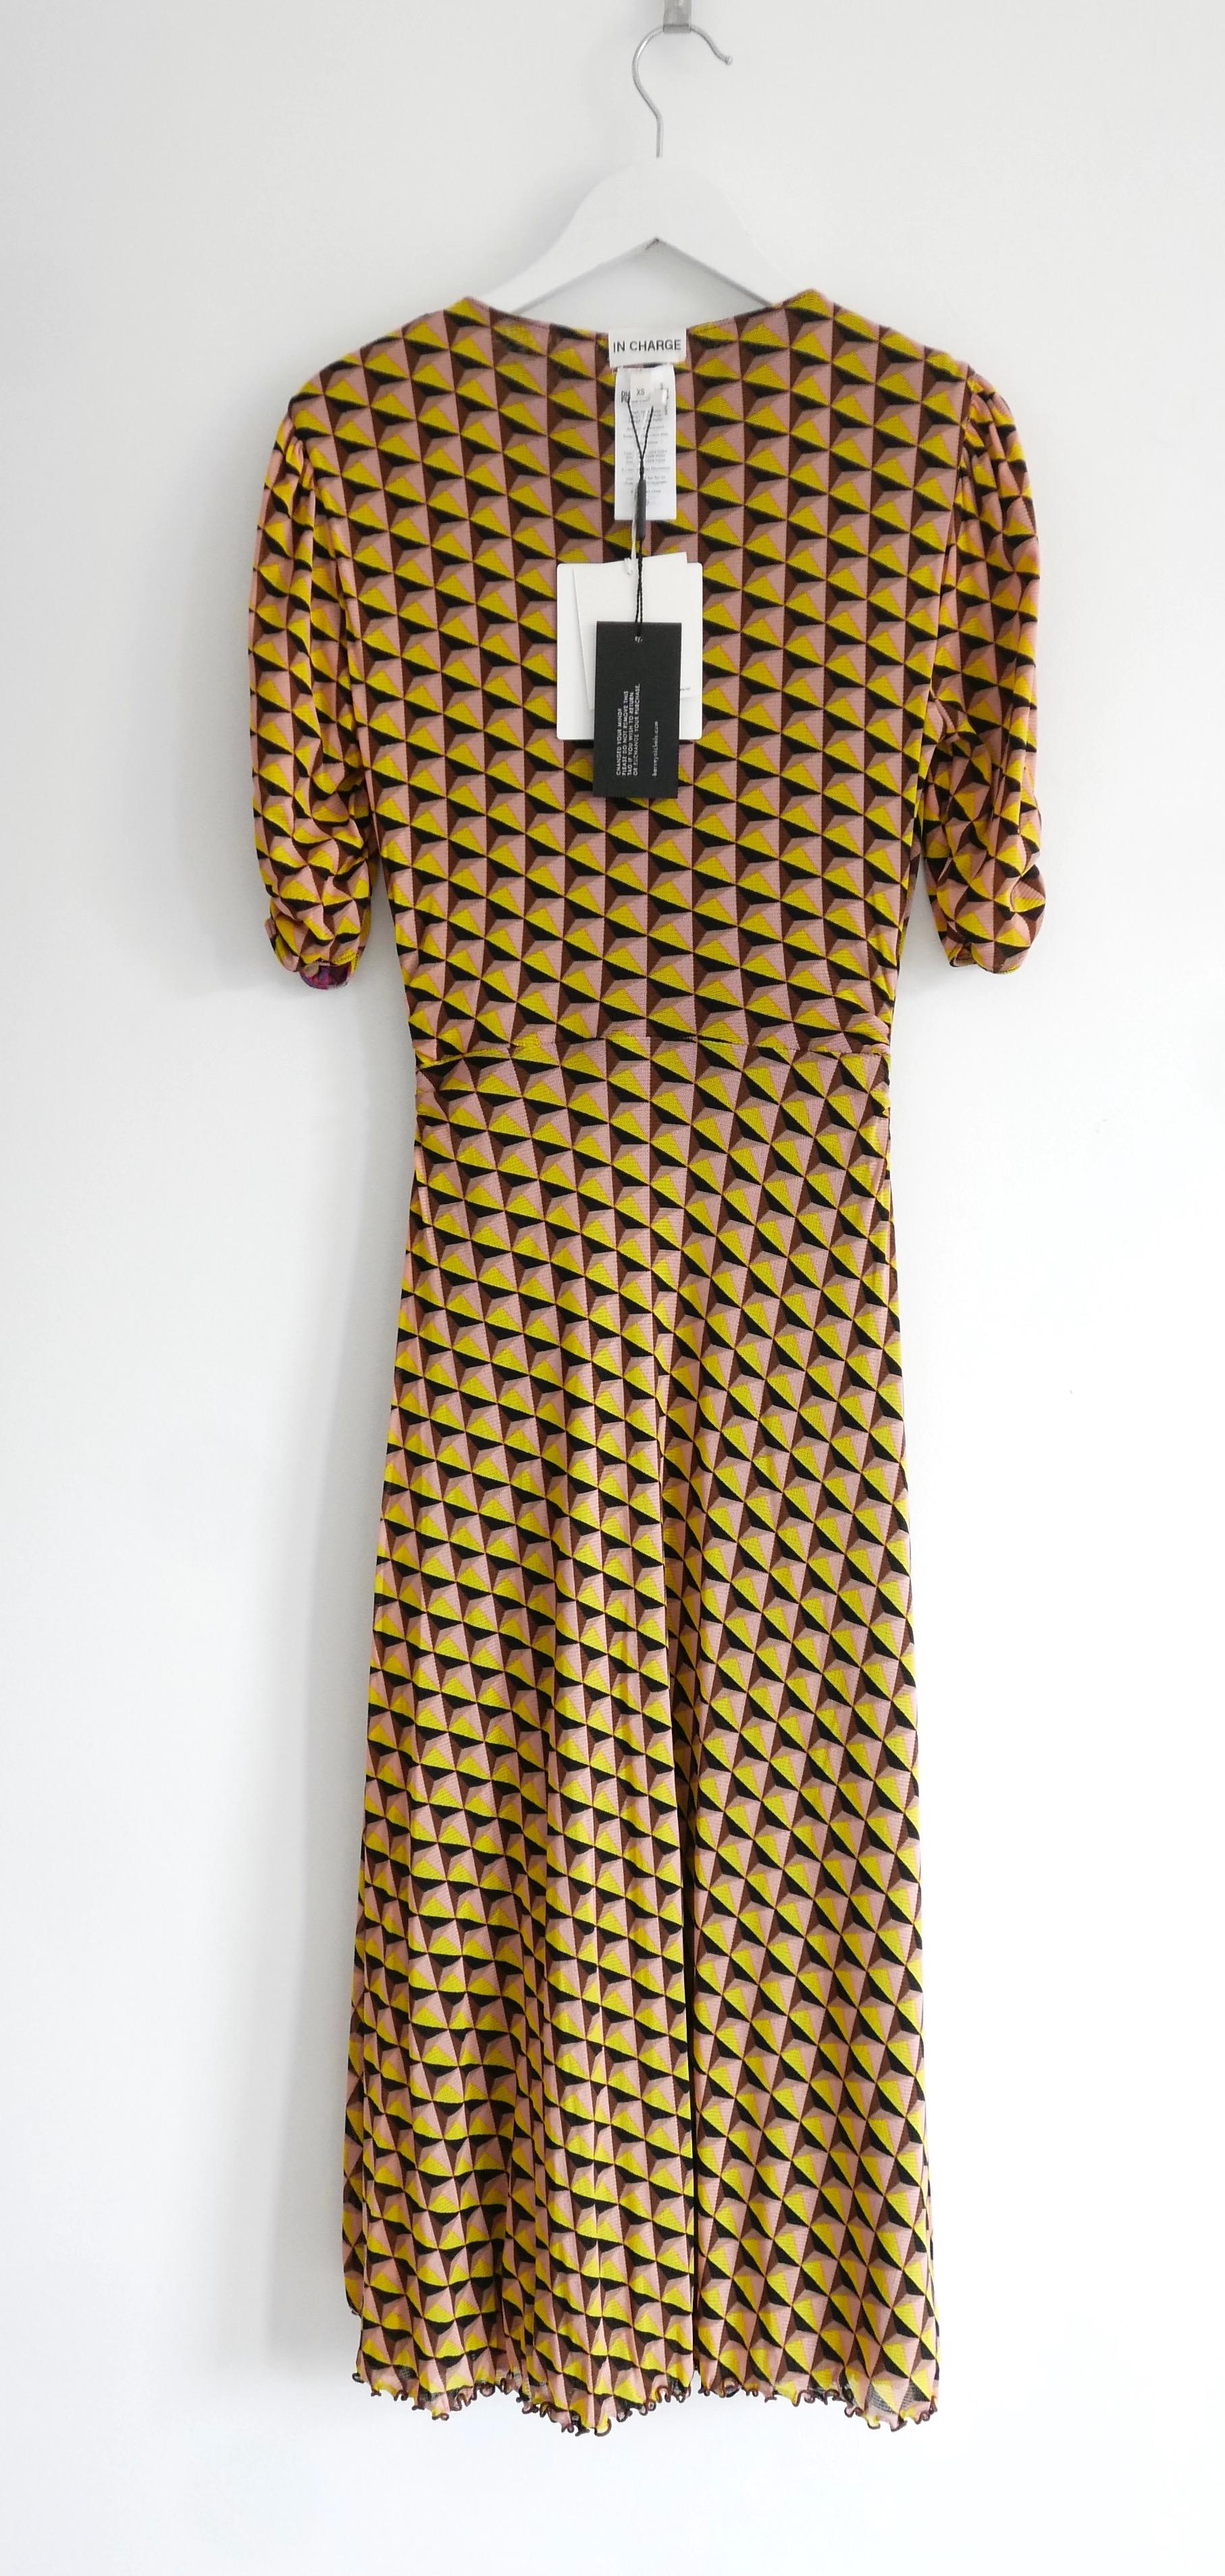 Super chic and versatile Diane Von Furstenberg Koren reversible  dress - bought for £400 and new with tags. Made from super soft, stretchy nylon mesh with geometric print on one side and a floral print on the other. Neck label is supposed to be